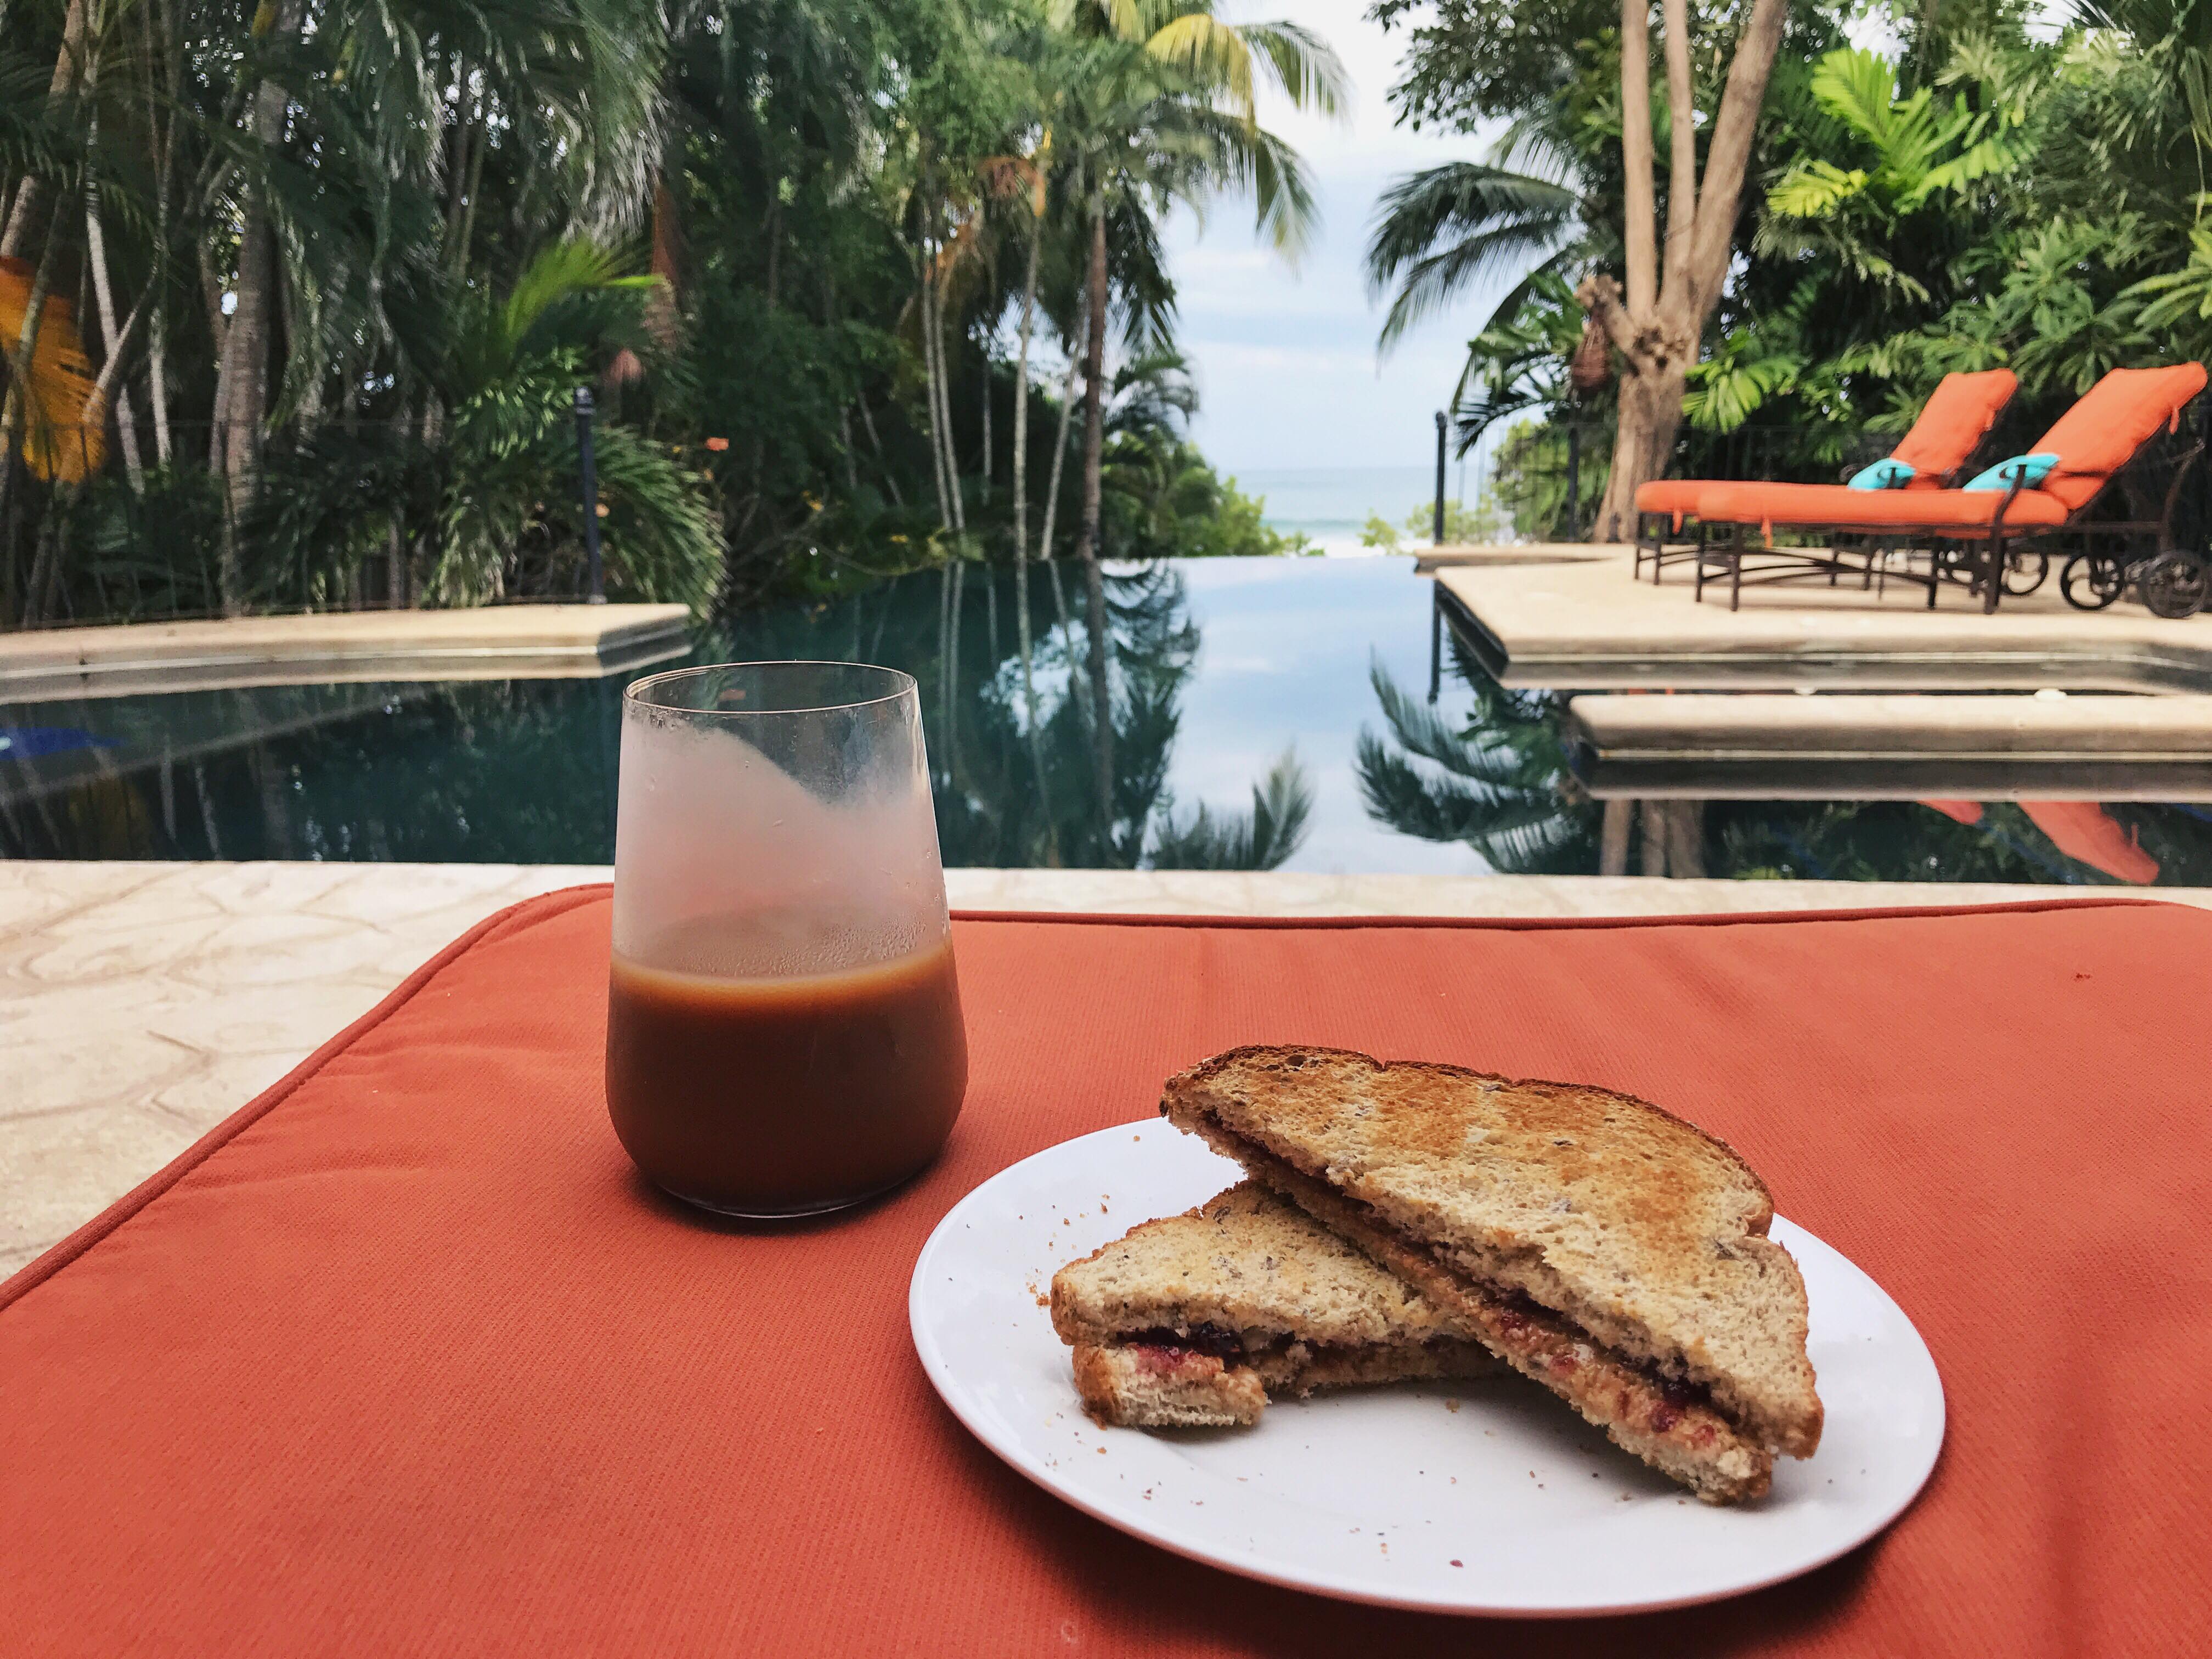 peanut butter and jelly sandwich by the water in costa rica